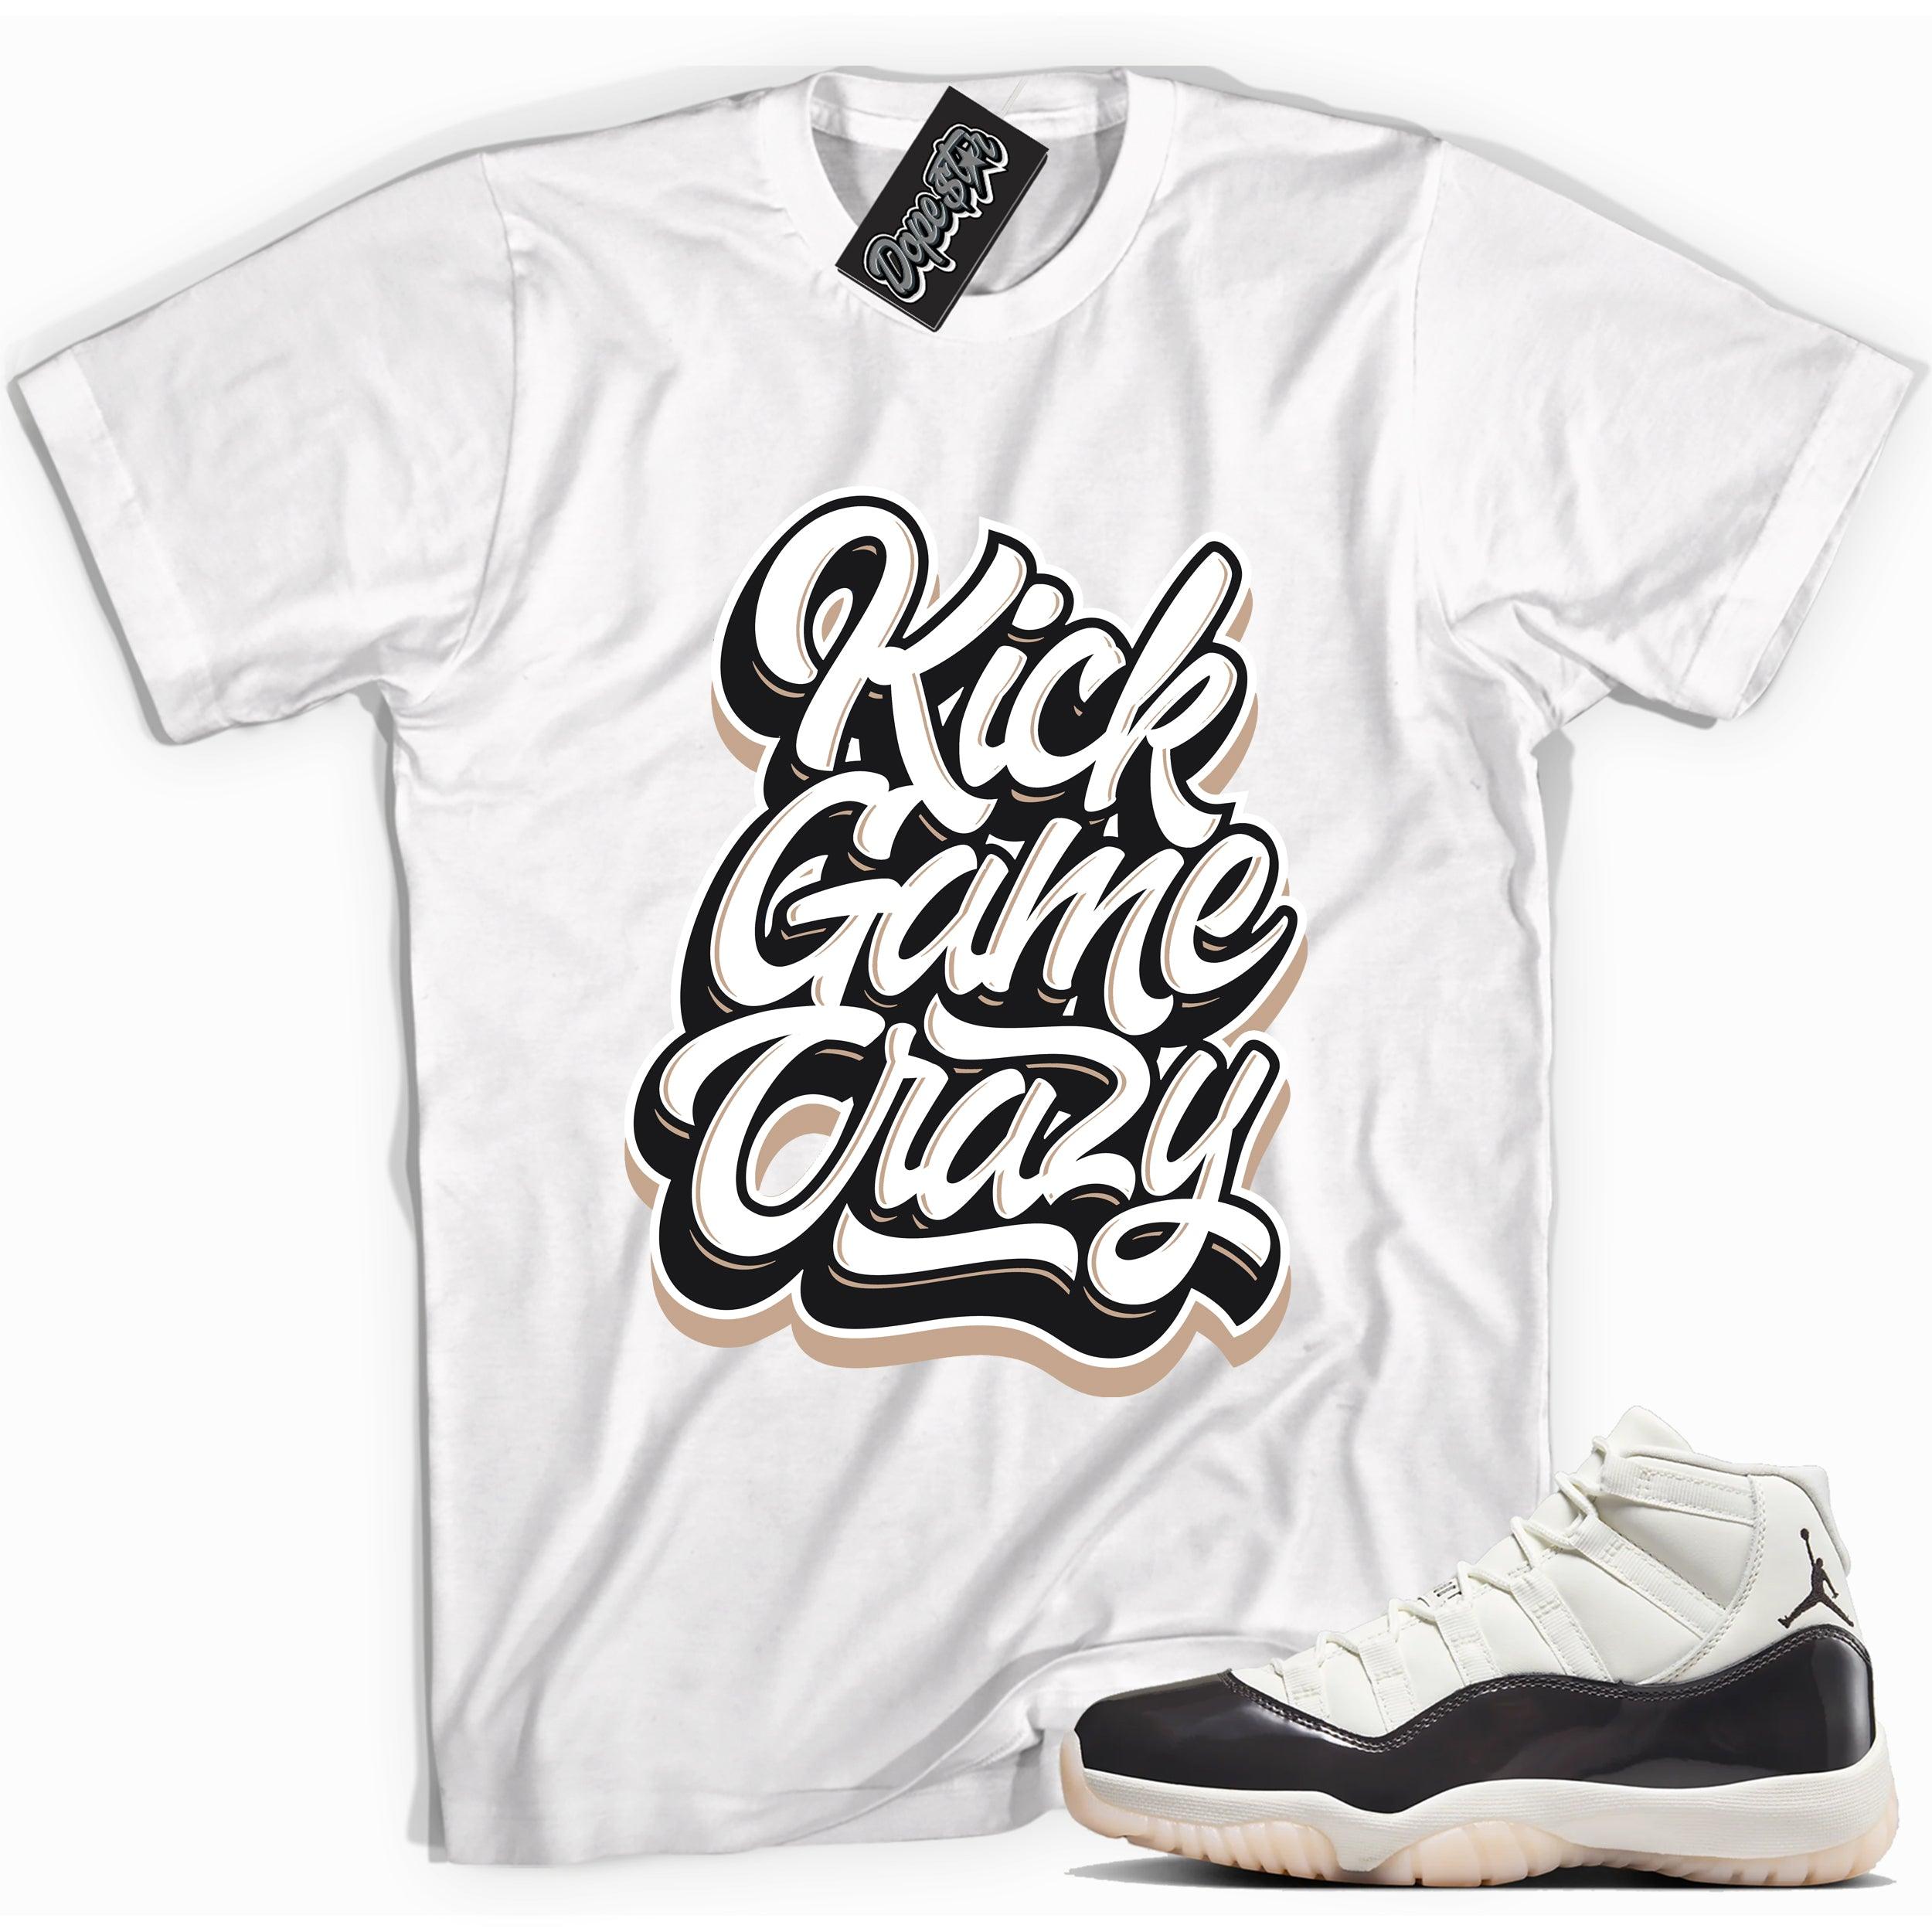 Cool White graphic tee with “ Kick Game Crazy ” print, that perfectly matches Air Jordan 11 Neapolitan sneakers 